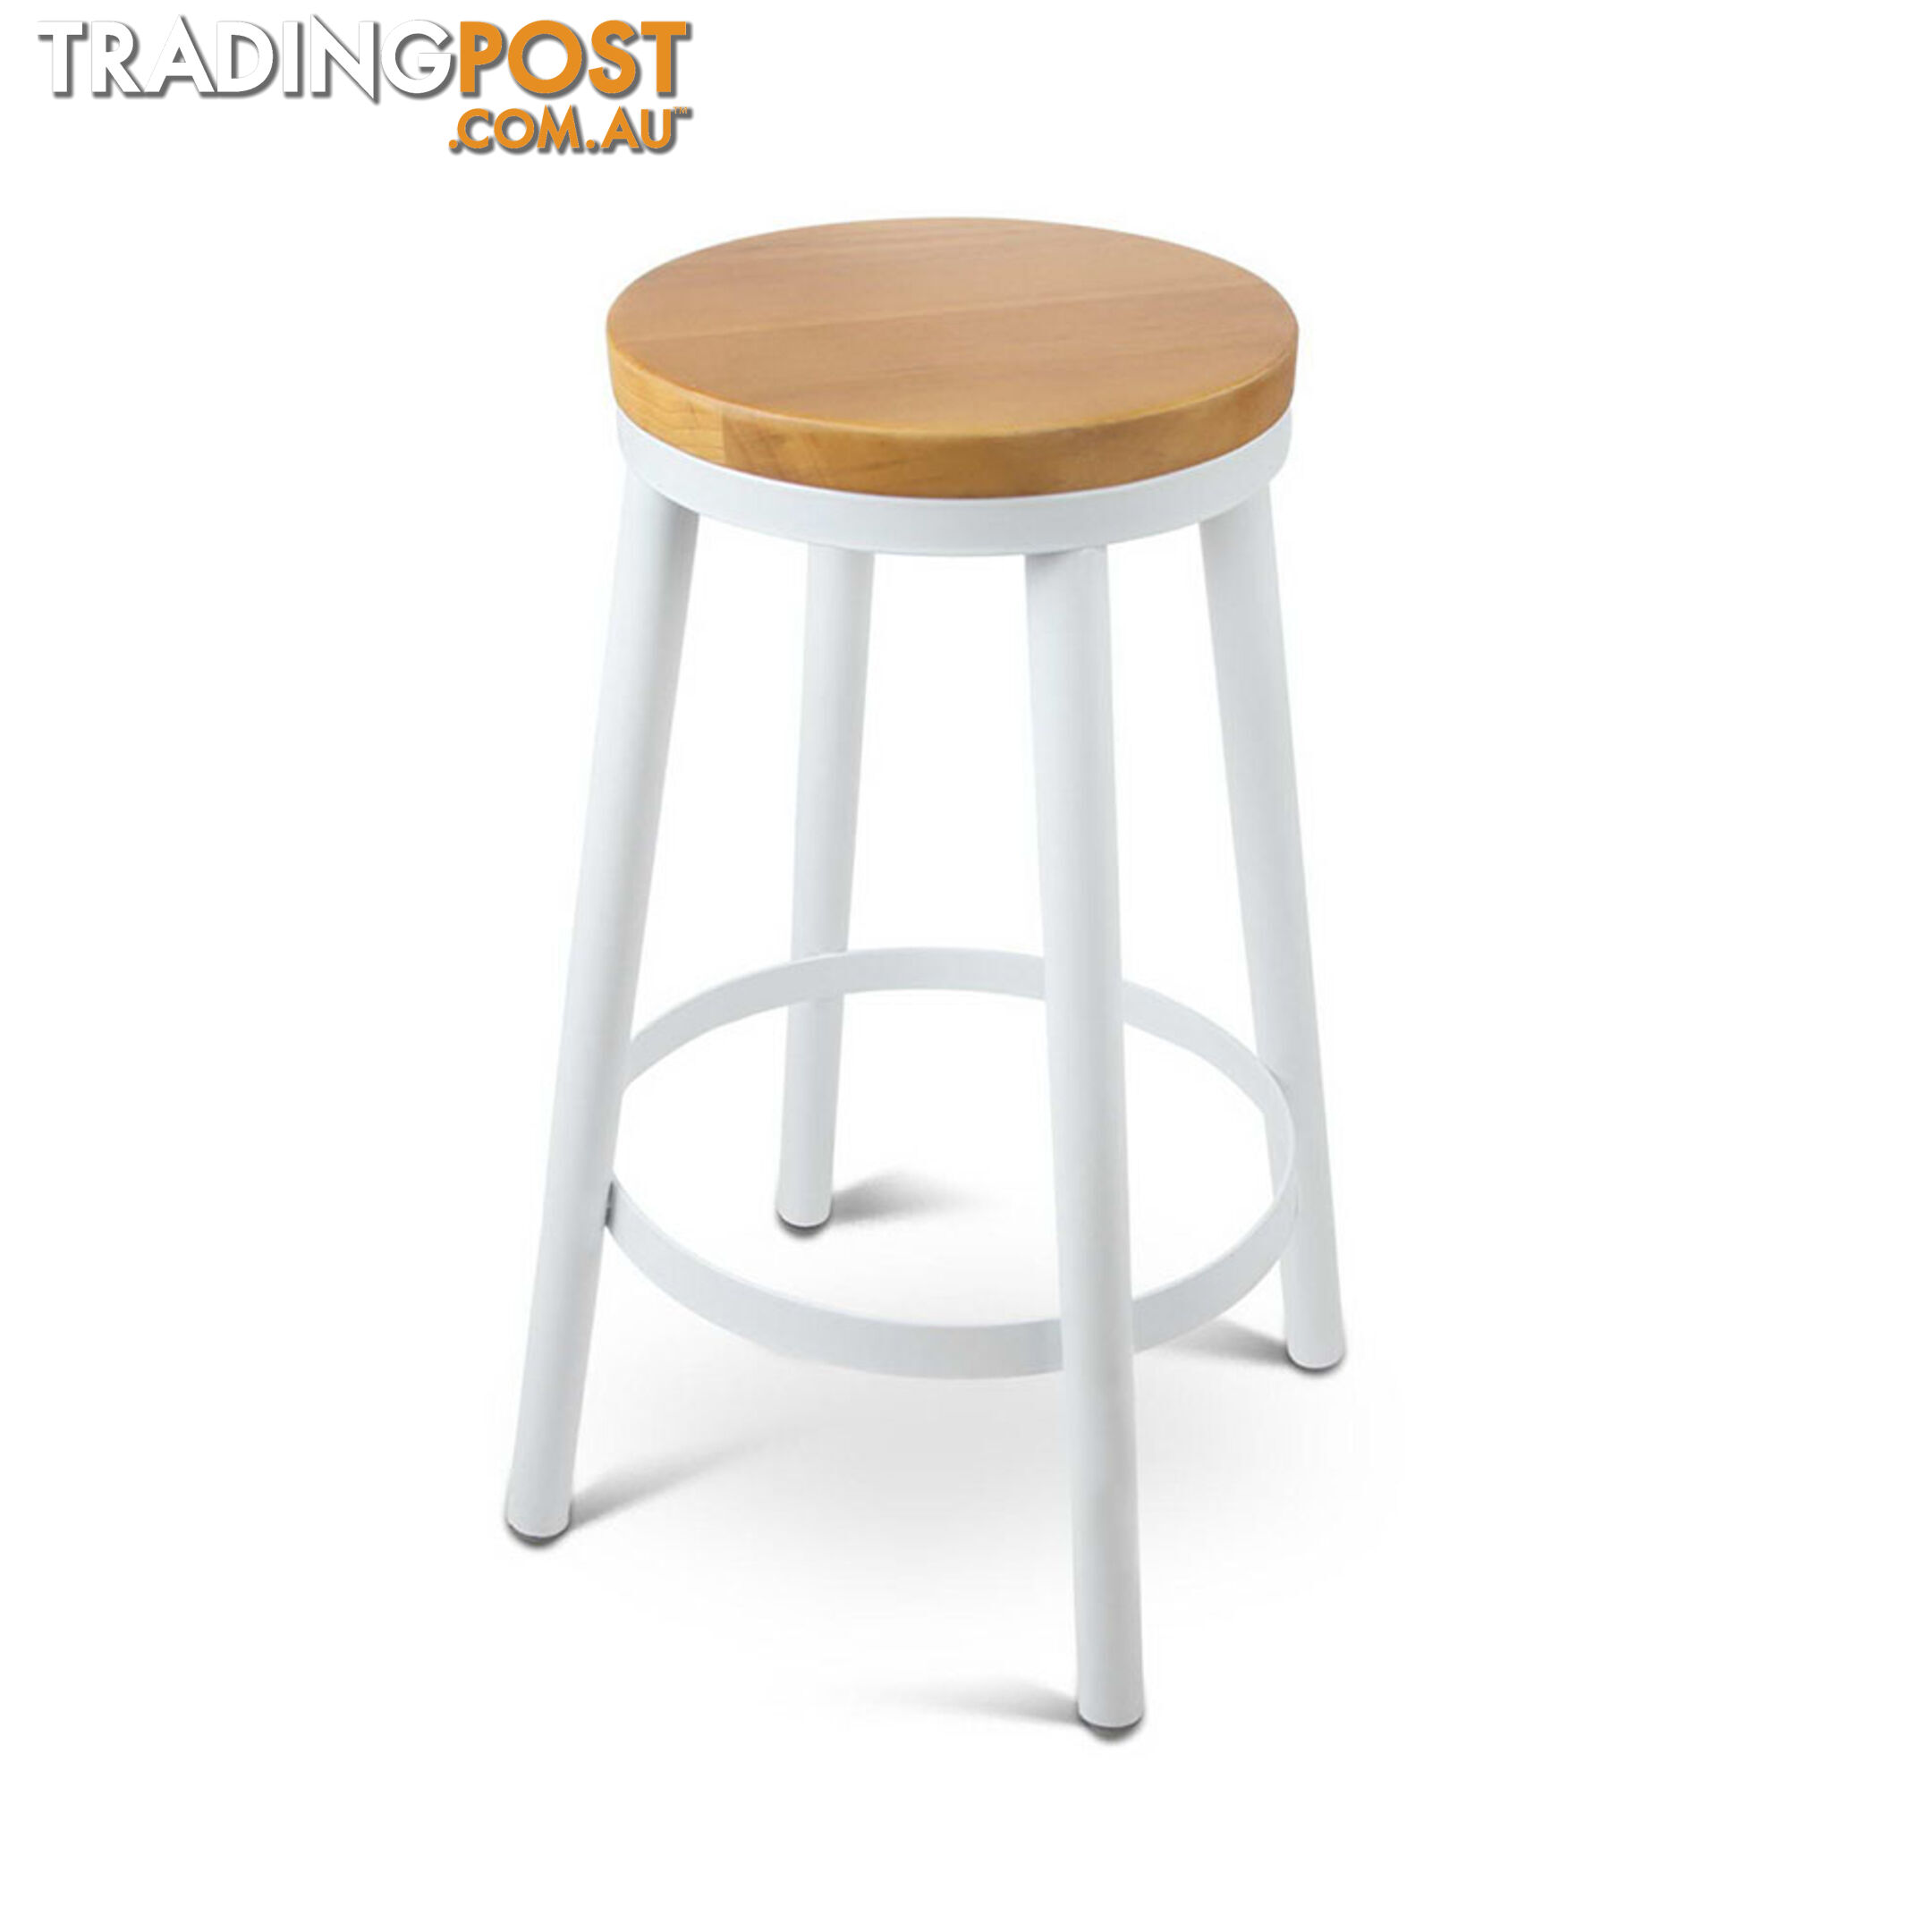 Set of 2 Round White Stackable Bar Stools